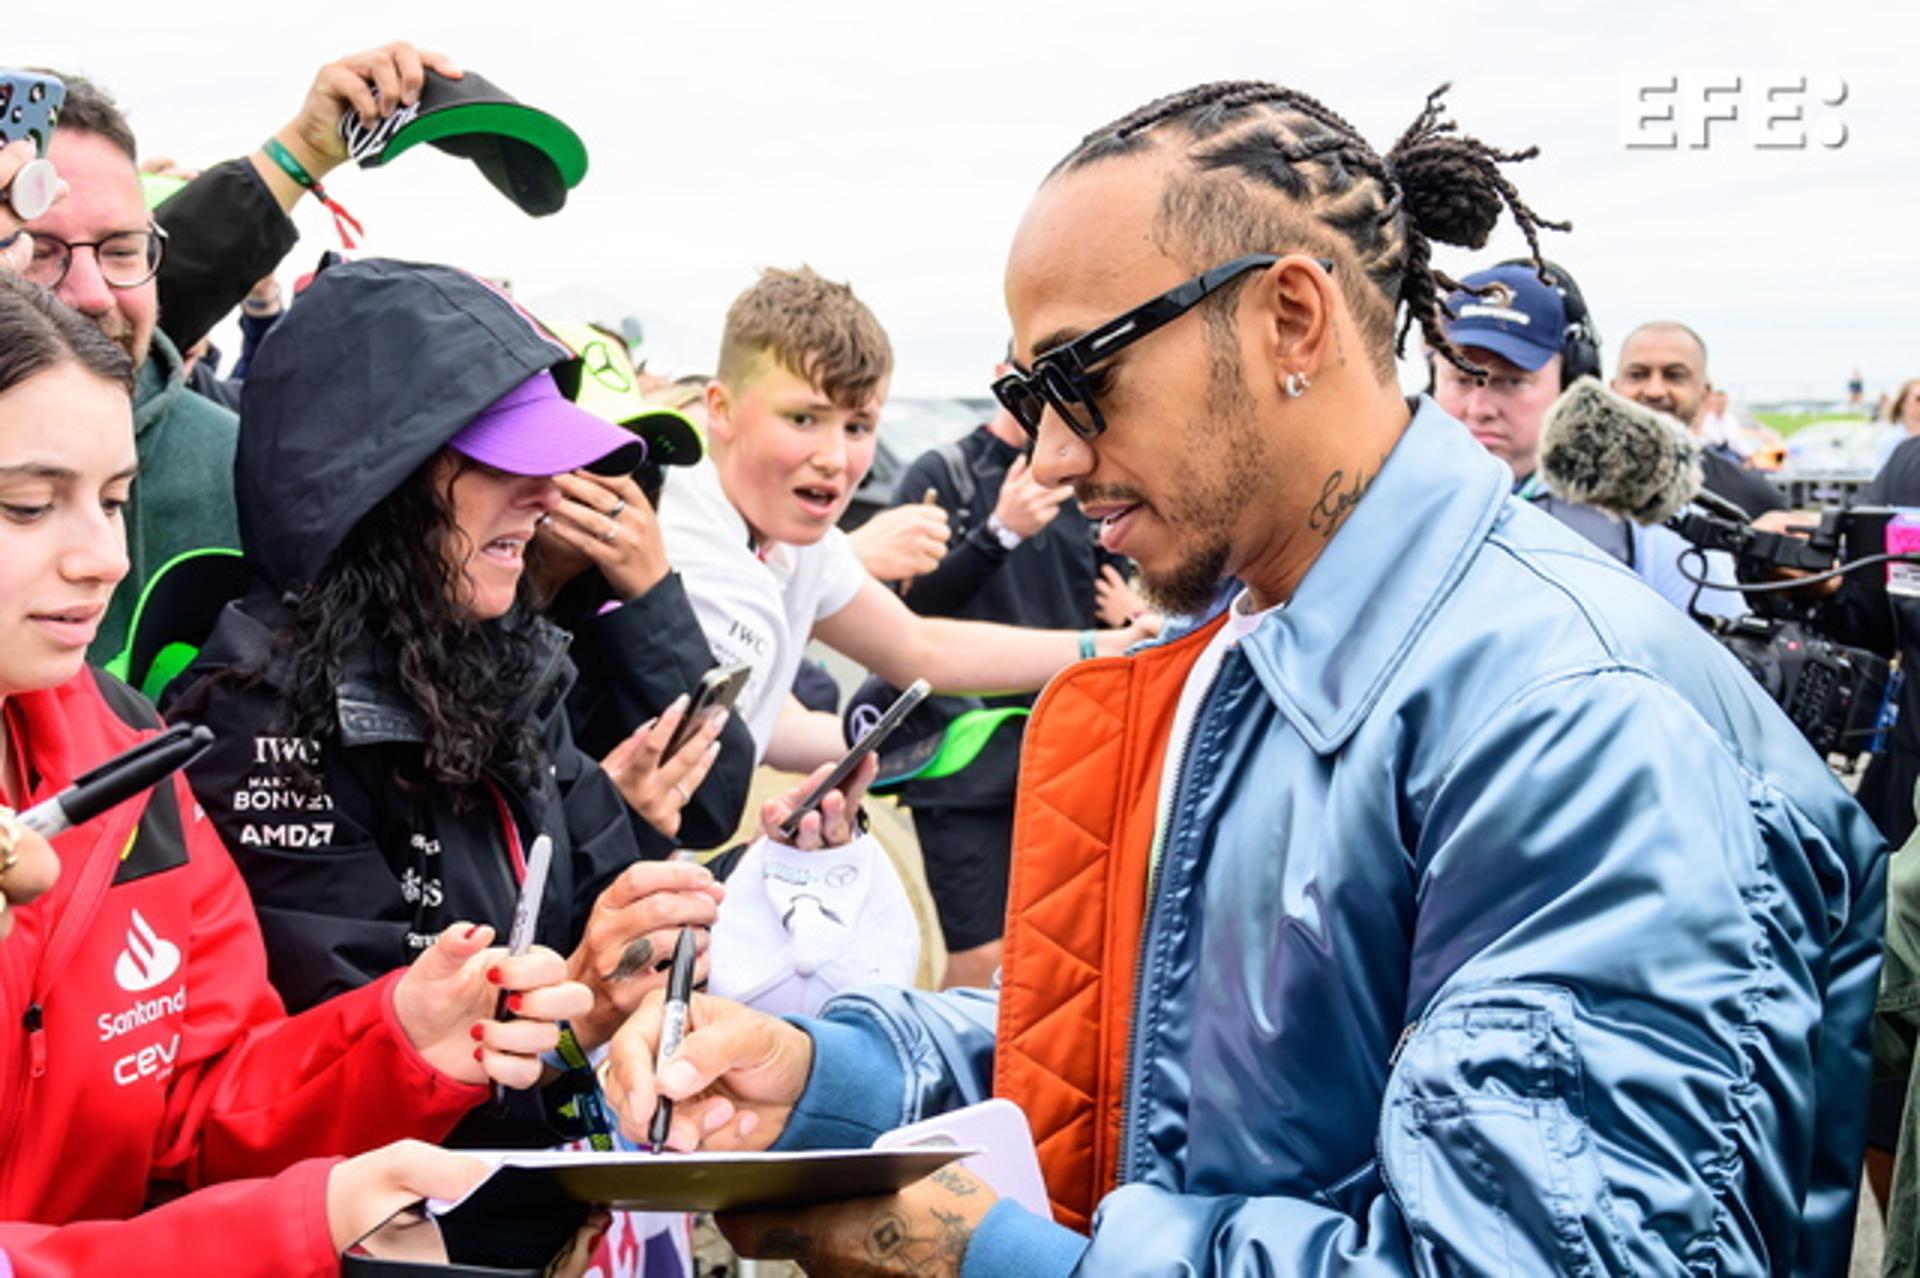 Lewis Hamilton (Mercedes) signs autographs ahead of the Formula 1 British Grand Prix 2023 at the Silverstone Circuit in Silverstone, England, on 9 July 2023. EFE/EPA/CHRISTIAN BRUNA
